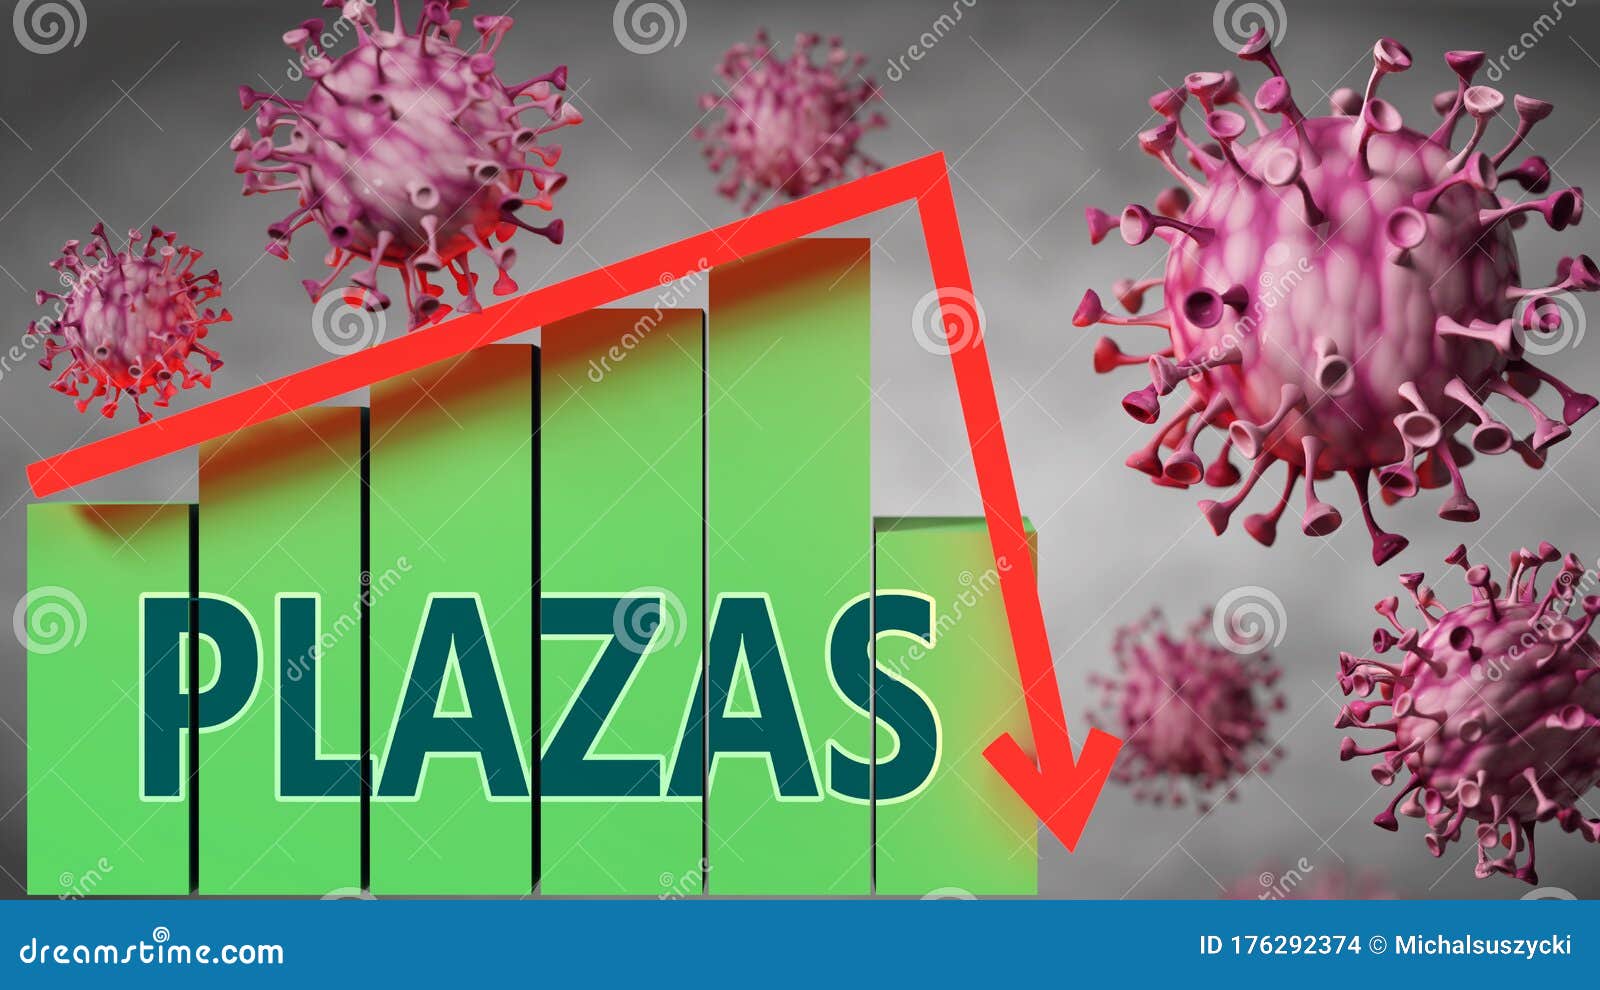 plazas and covid-19 virus, ized by viruses and a price chart falling down with word plazas to picture relation between the